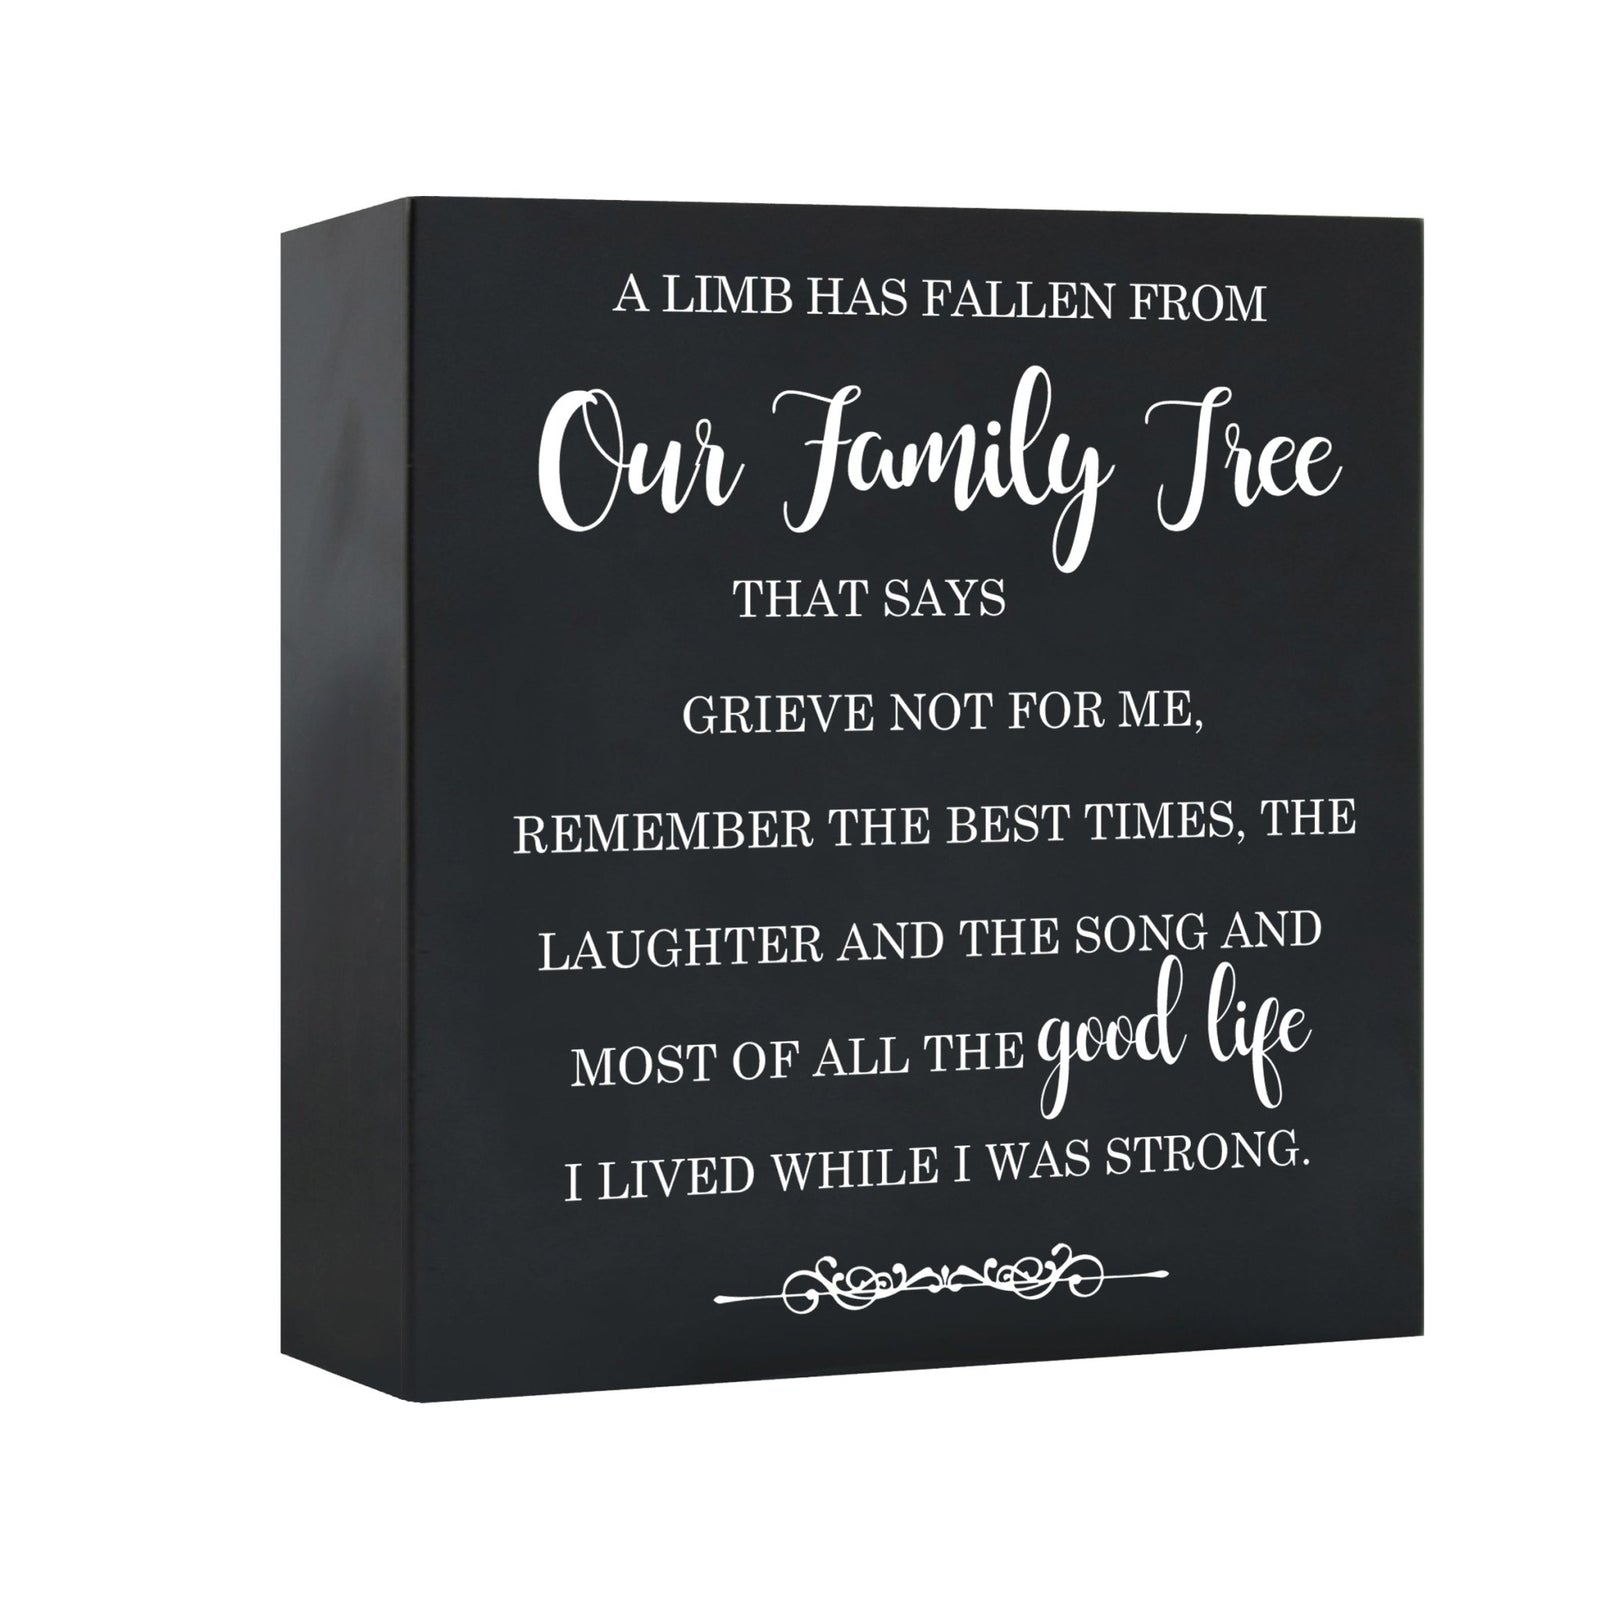 Memorial Keepsake Wooden Cremation Shadow Box and Urn 10x10in Holds 189 Cu Inches Of Human Ashes A Limb Has Fallen - LifeSong Milestones